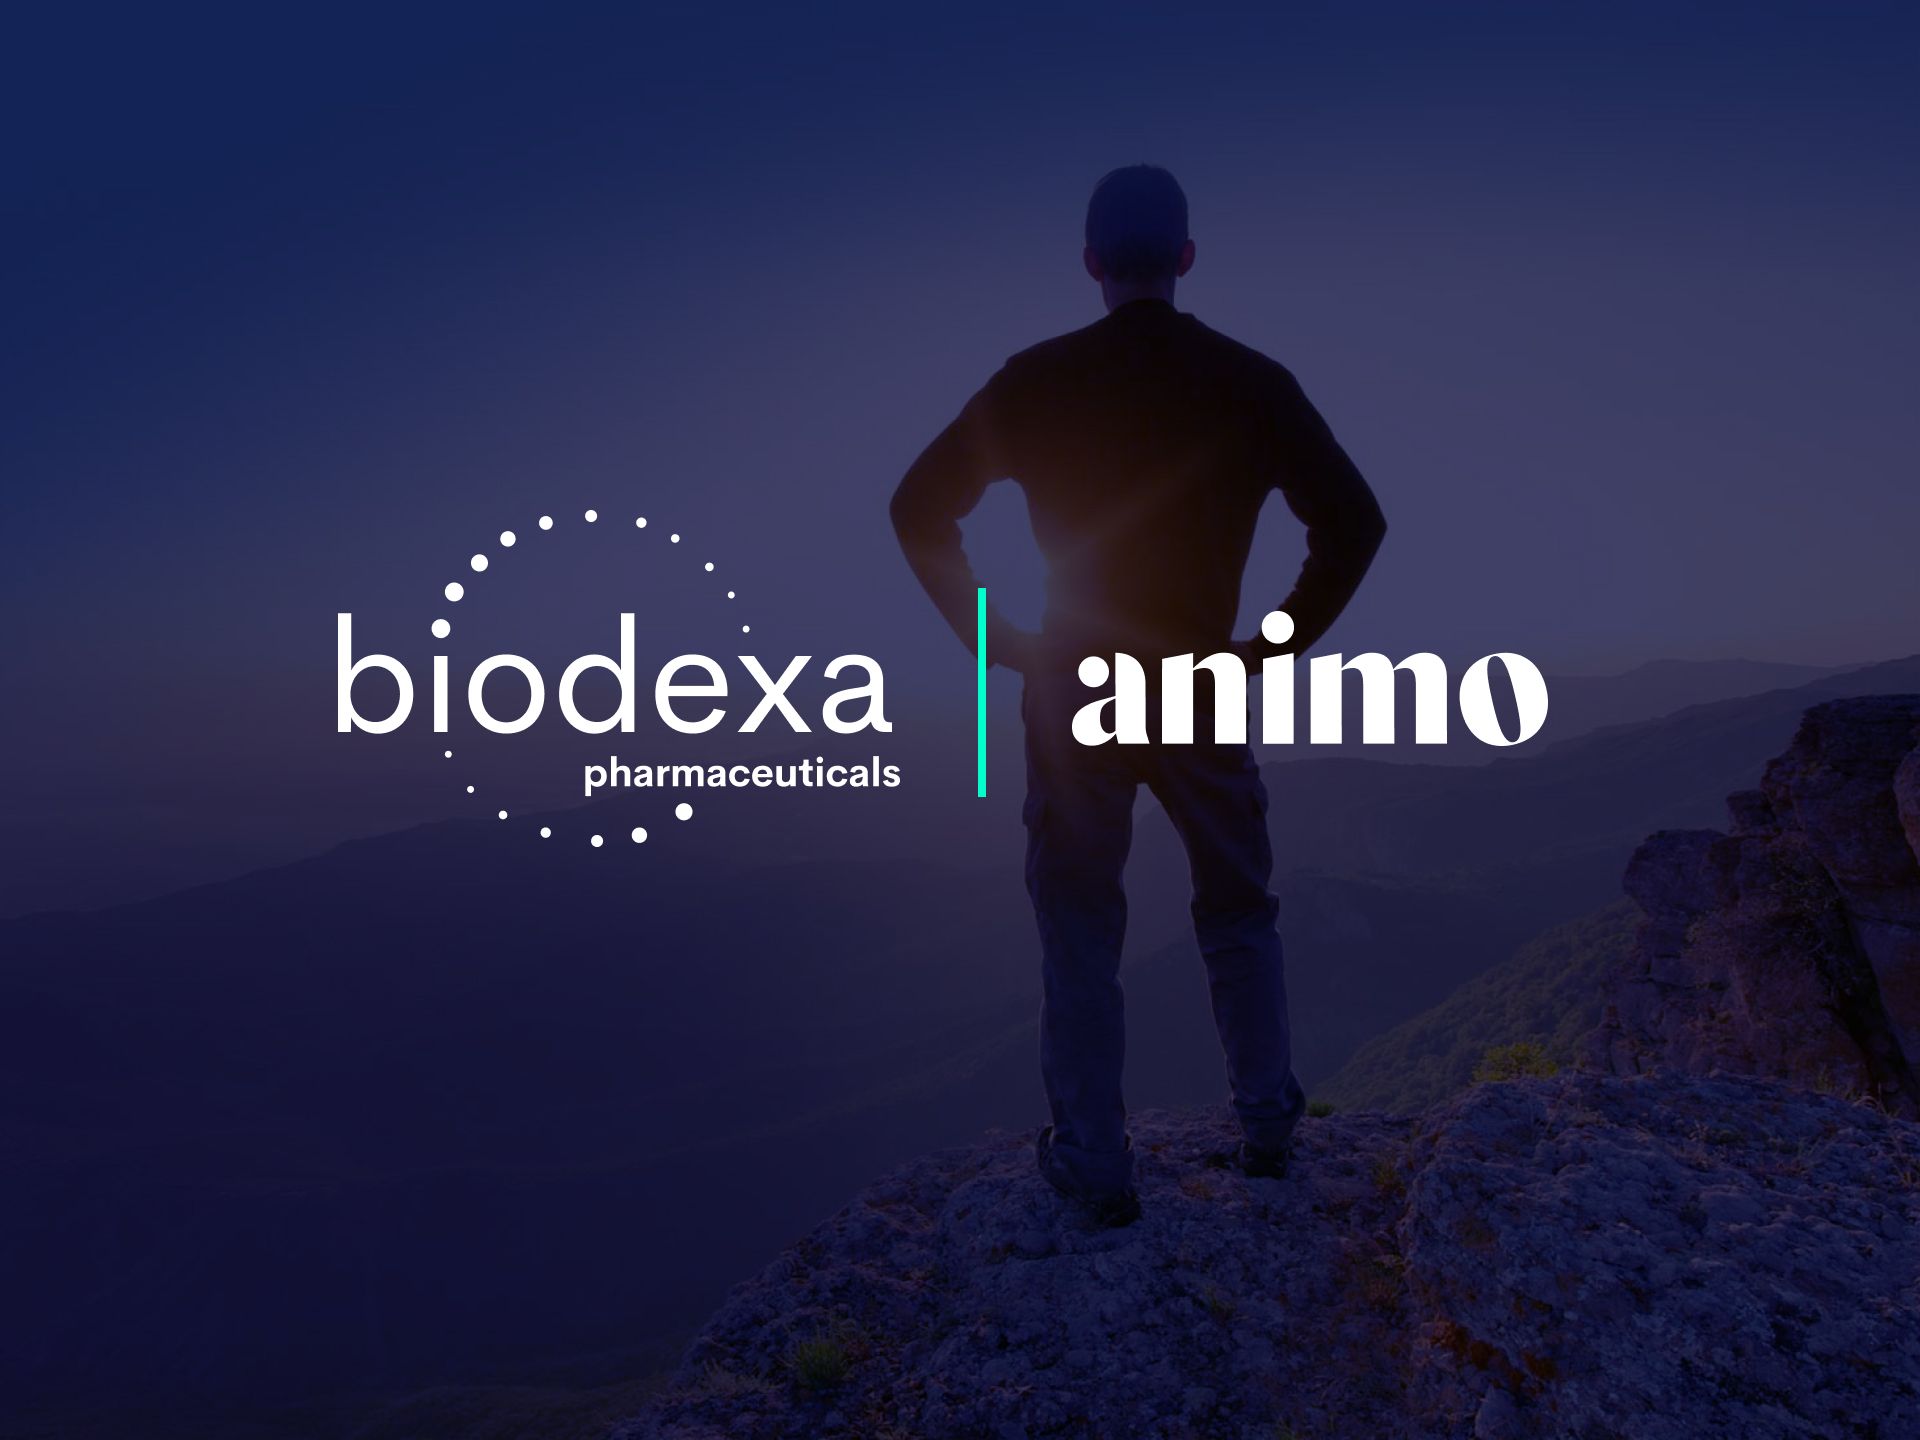 a man standing on top of a mountain with the biodexa logo and animo logo